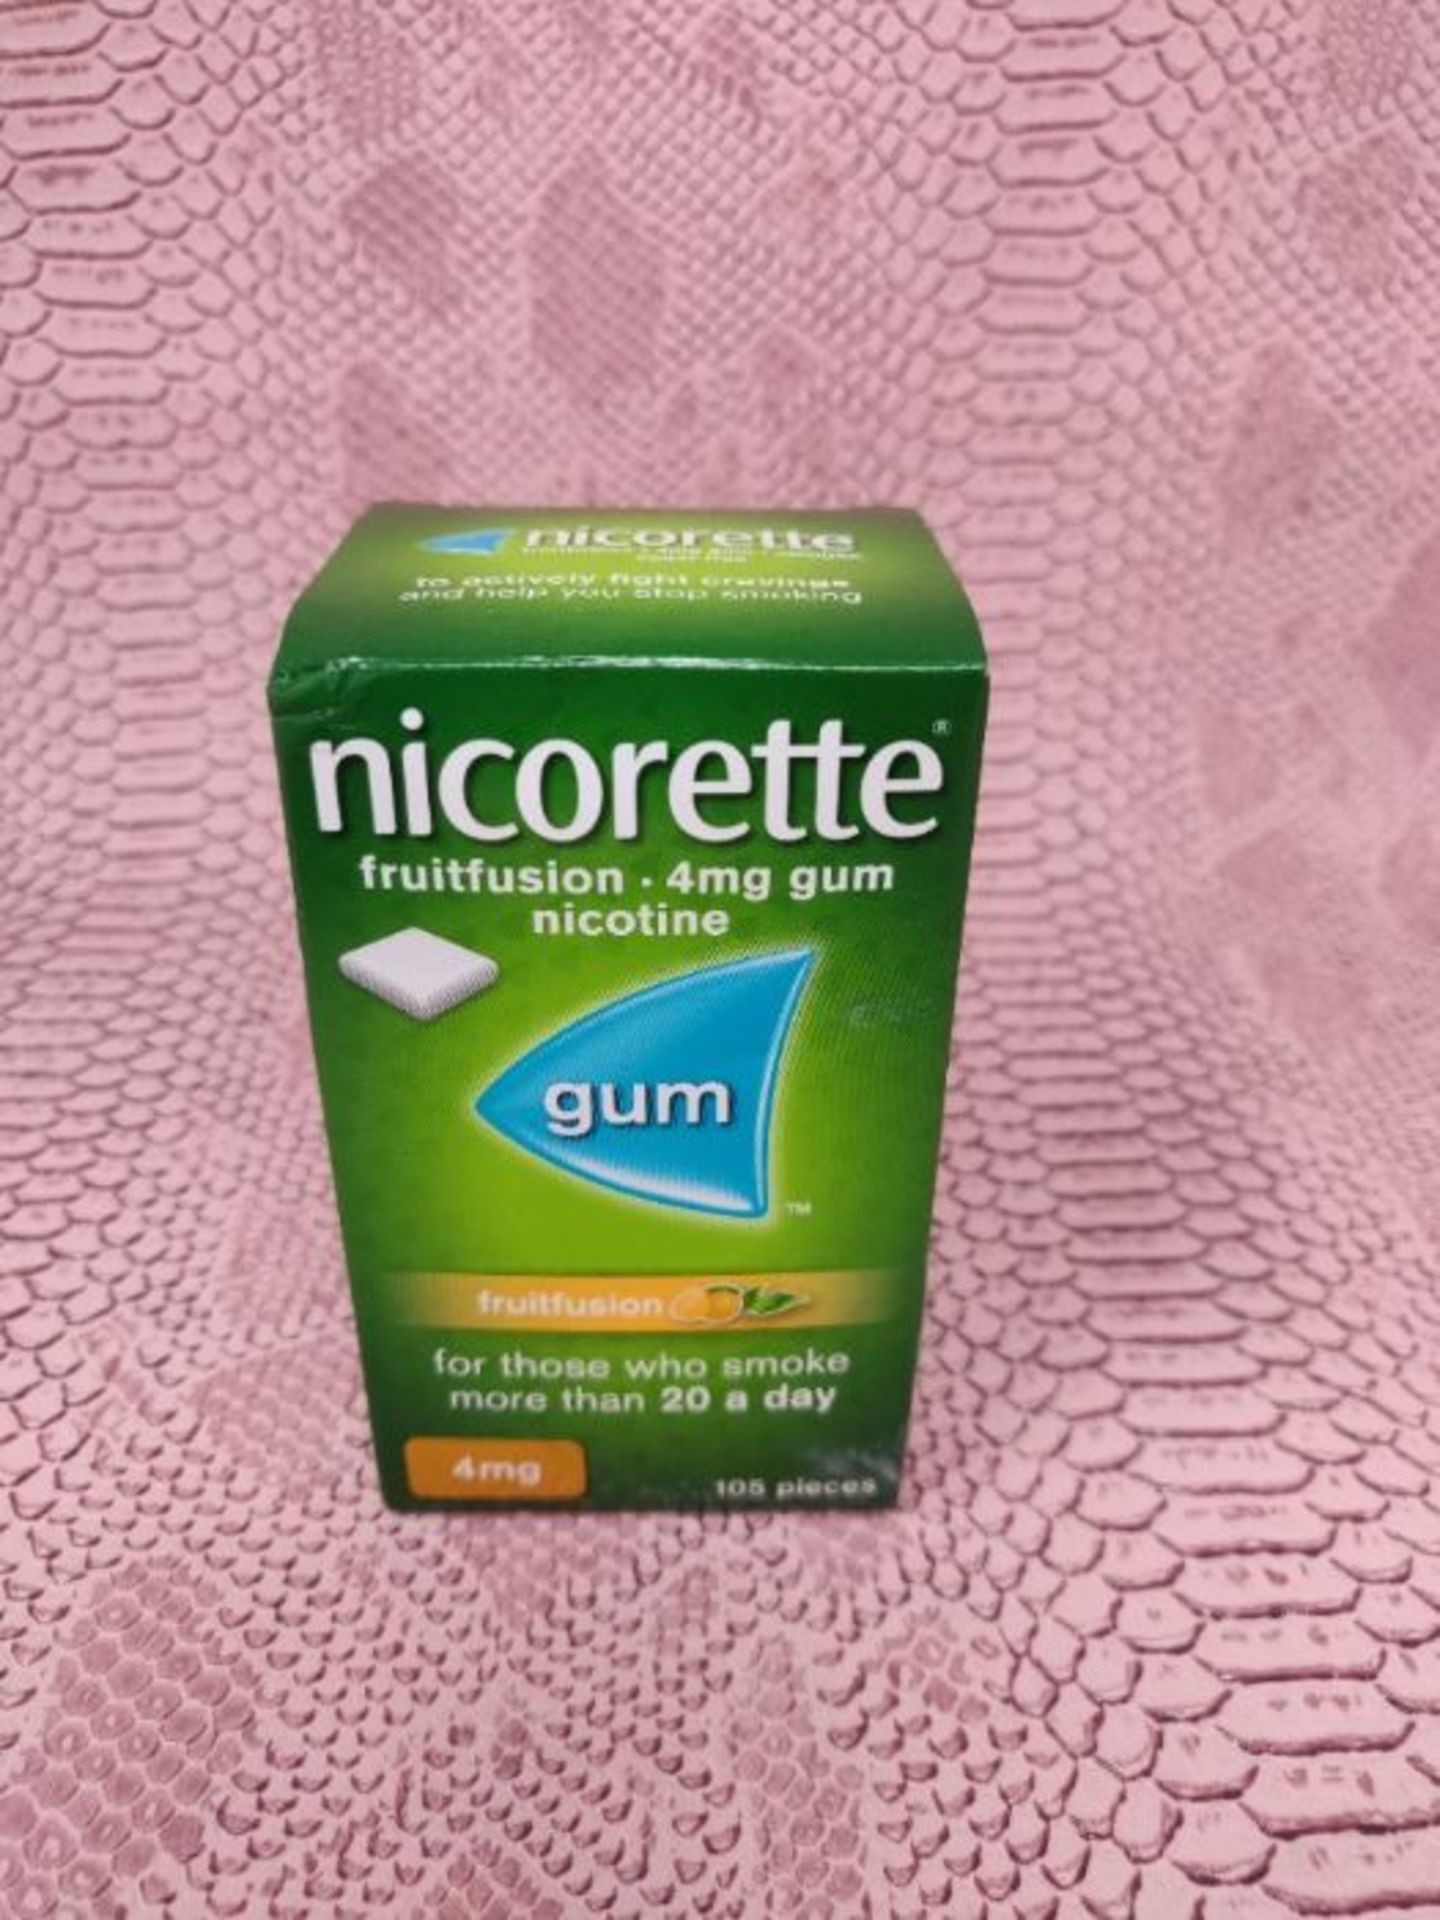 Nicorette Fruit Fusion Chewing Gum, 4 mg, 105 Pieces (Quit Smoking & Stop Smoking Aid) - Image 2 of 3